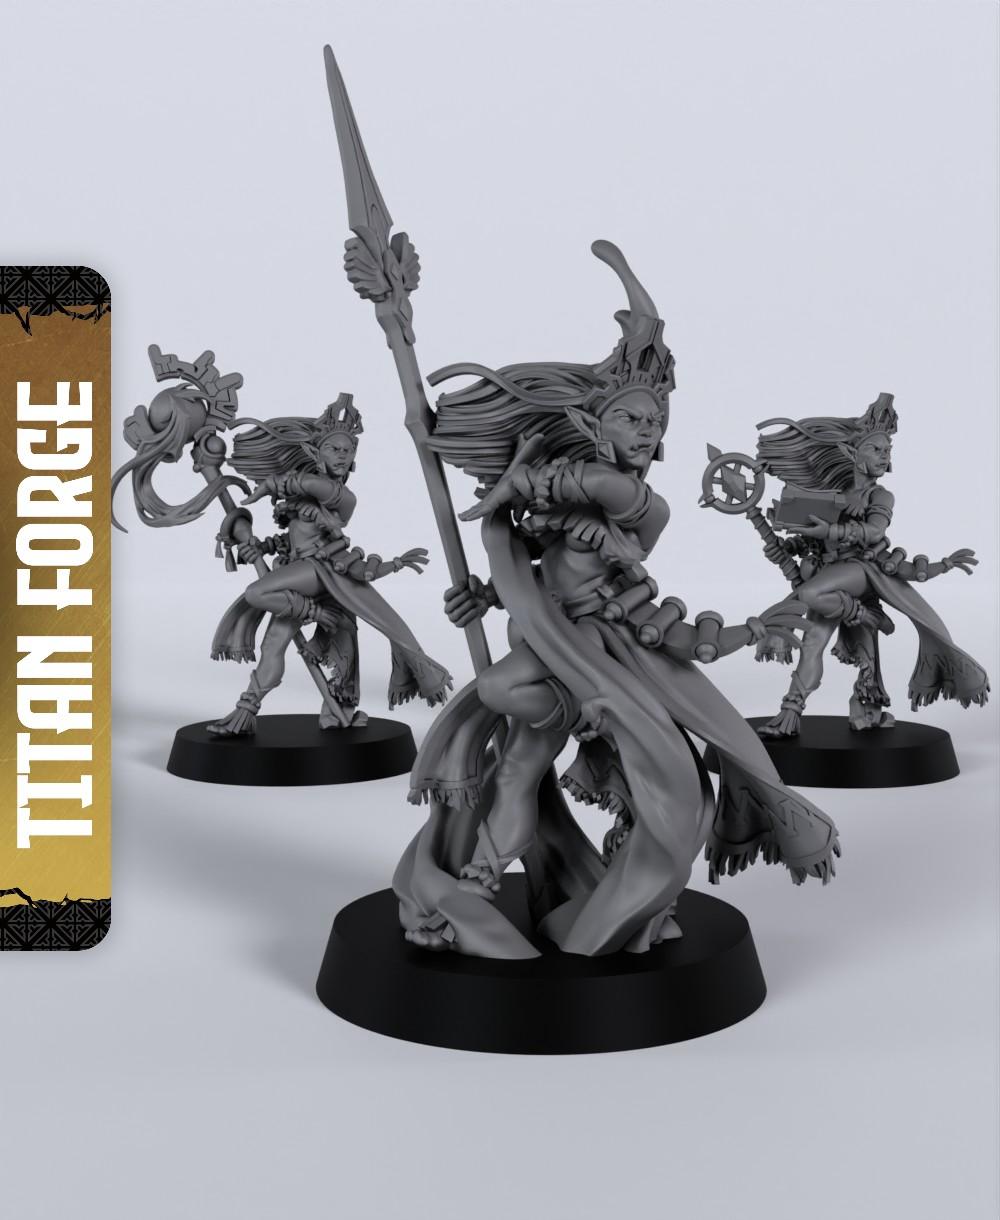 Half-Orc Female Cleric - With Free Dragon Warhammer - 5e DnD Inspired for RPG and Wargamers 3d model